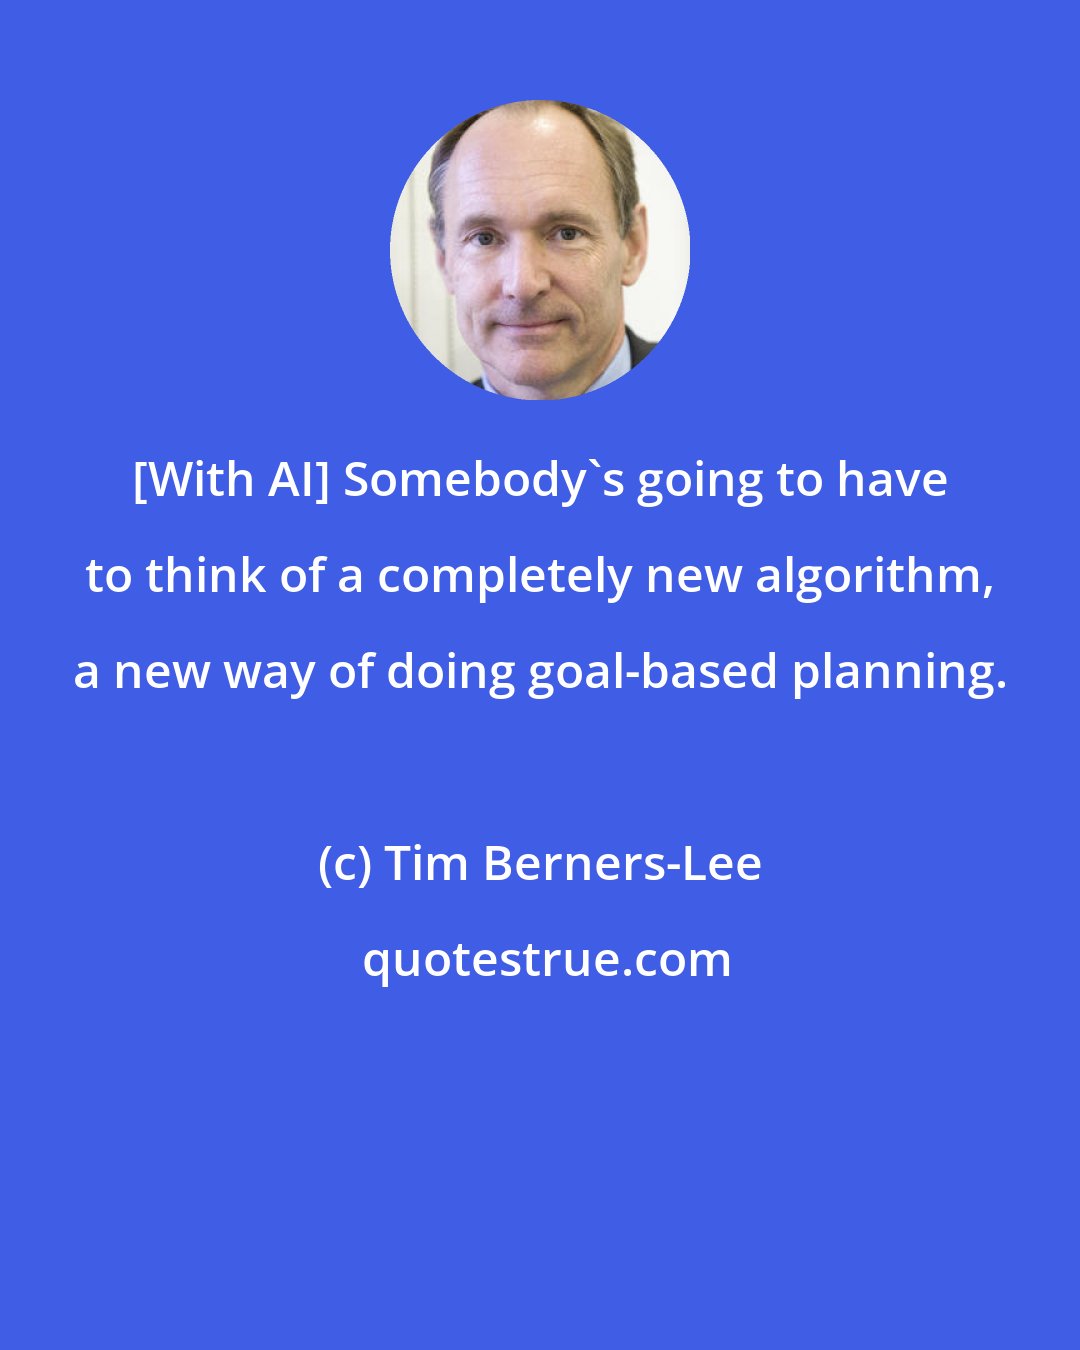 Tim Berners-Lee: [With AI] Somebody's going to have to think of a completely new algorithm, a new way of doing goal-based planning.